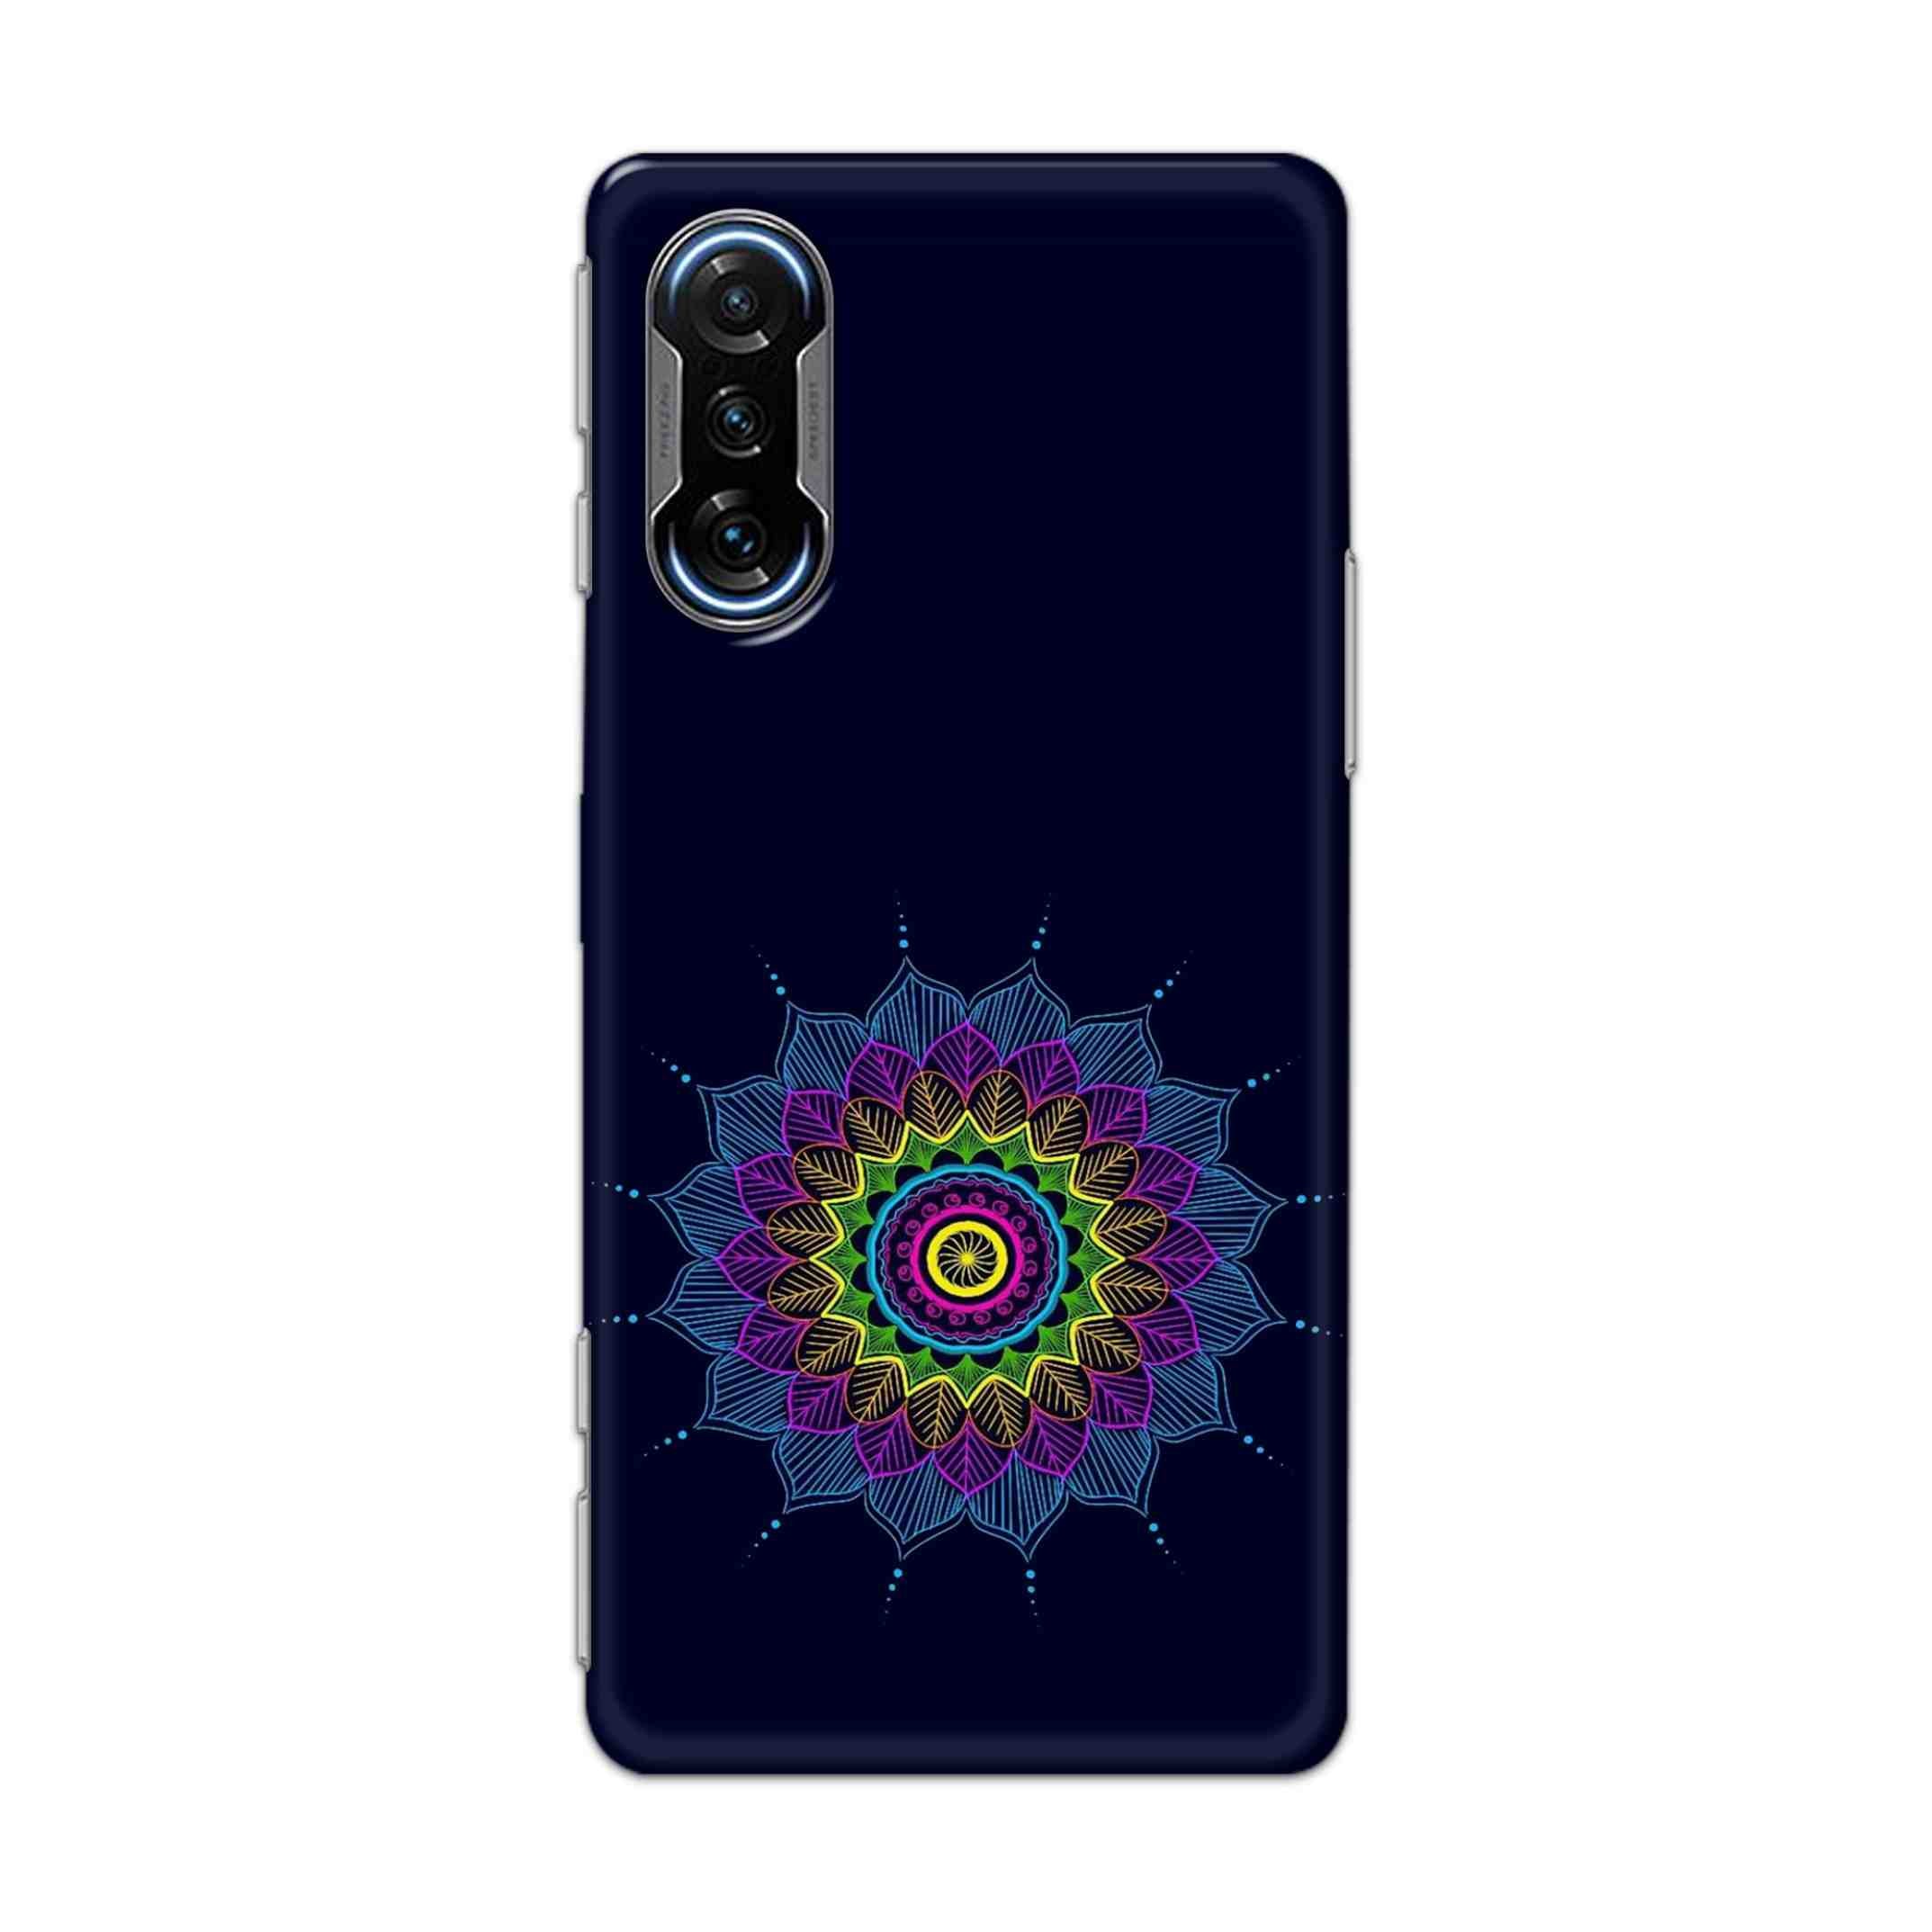 Buy Jung And Mandalas Hard Back Mobile Phone Case Cover For Poco F3 GT 5G Online